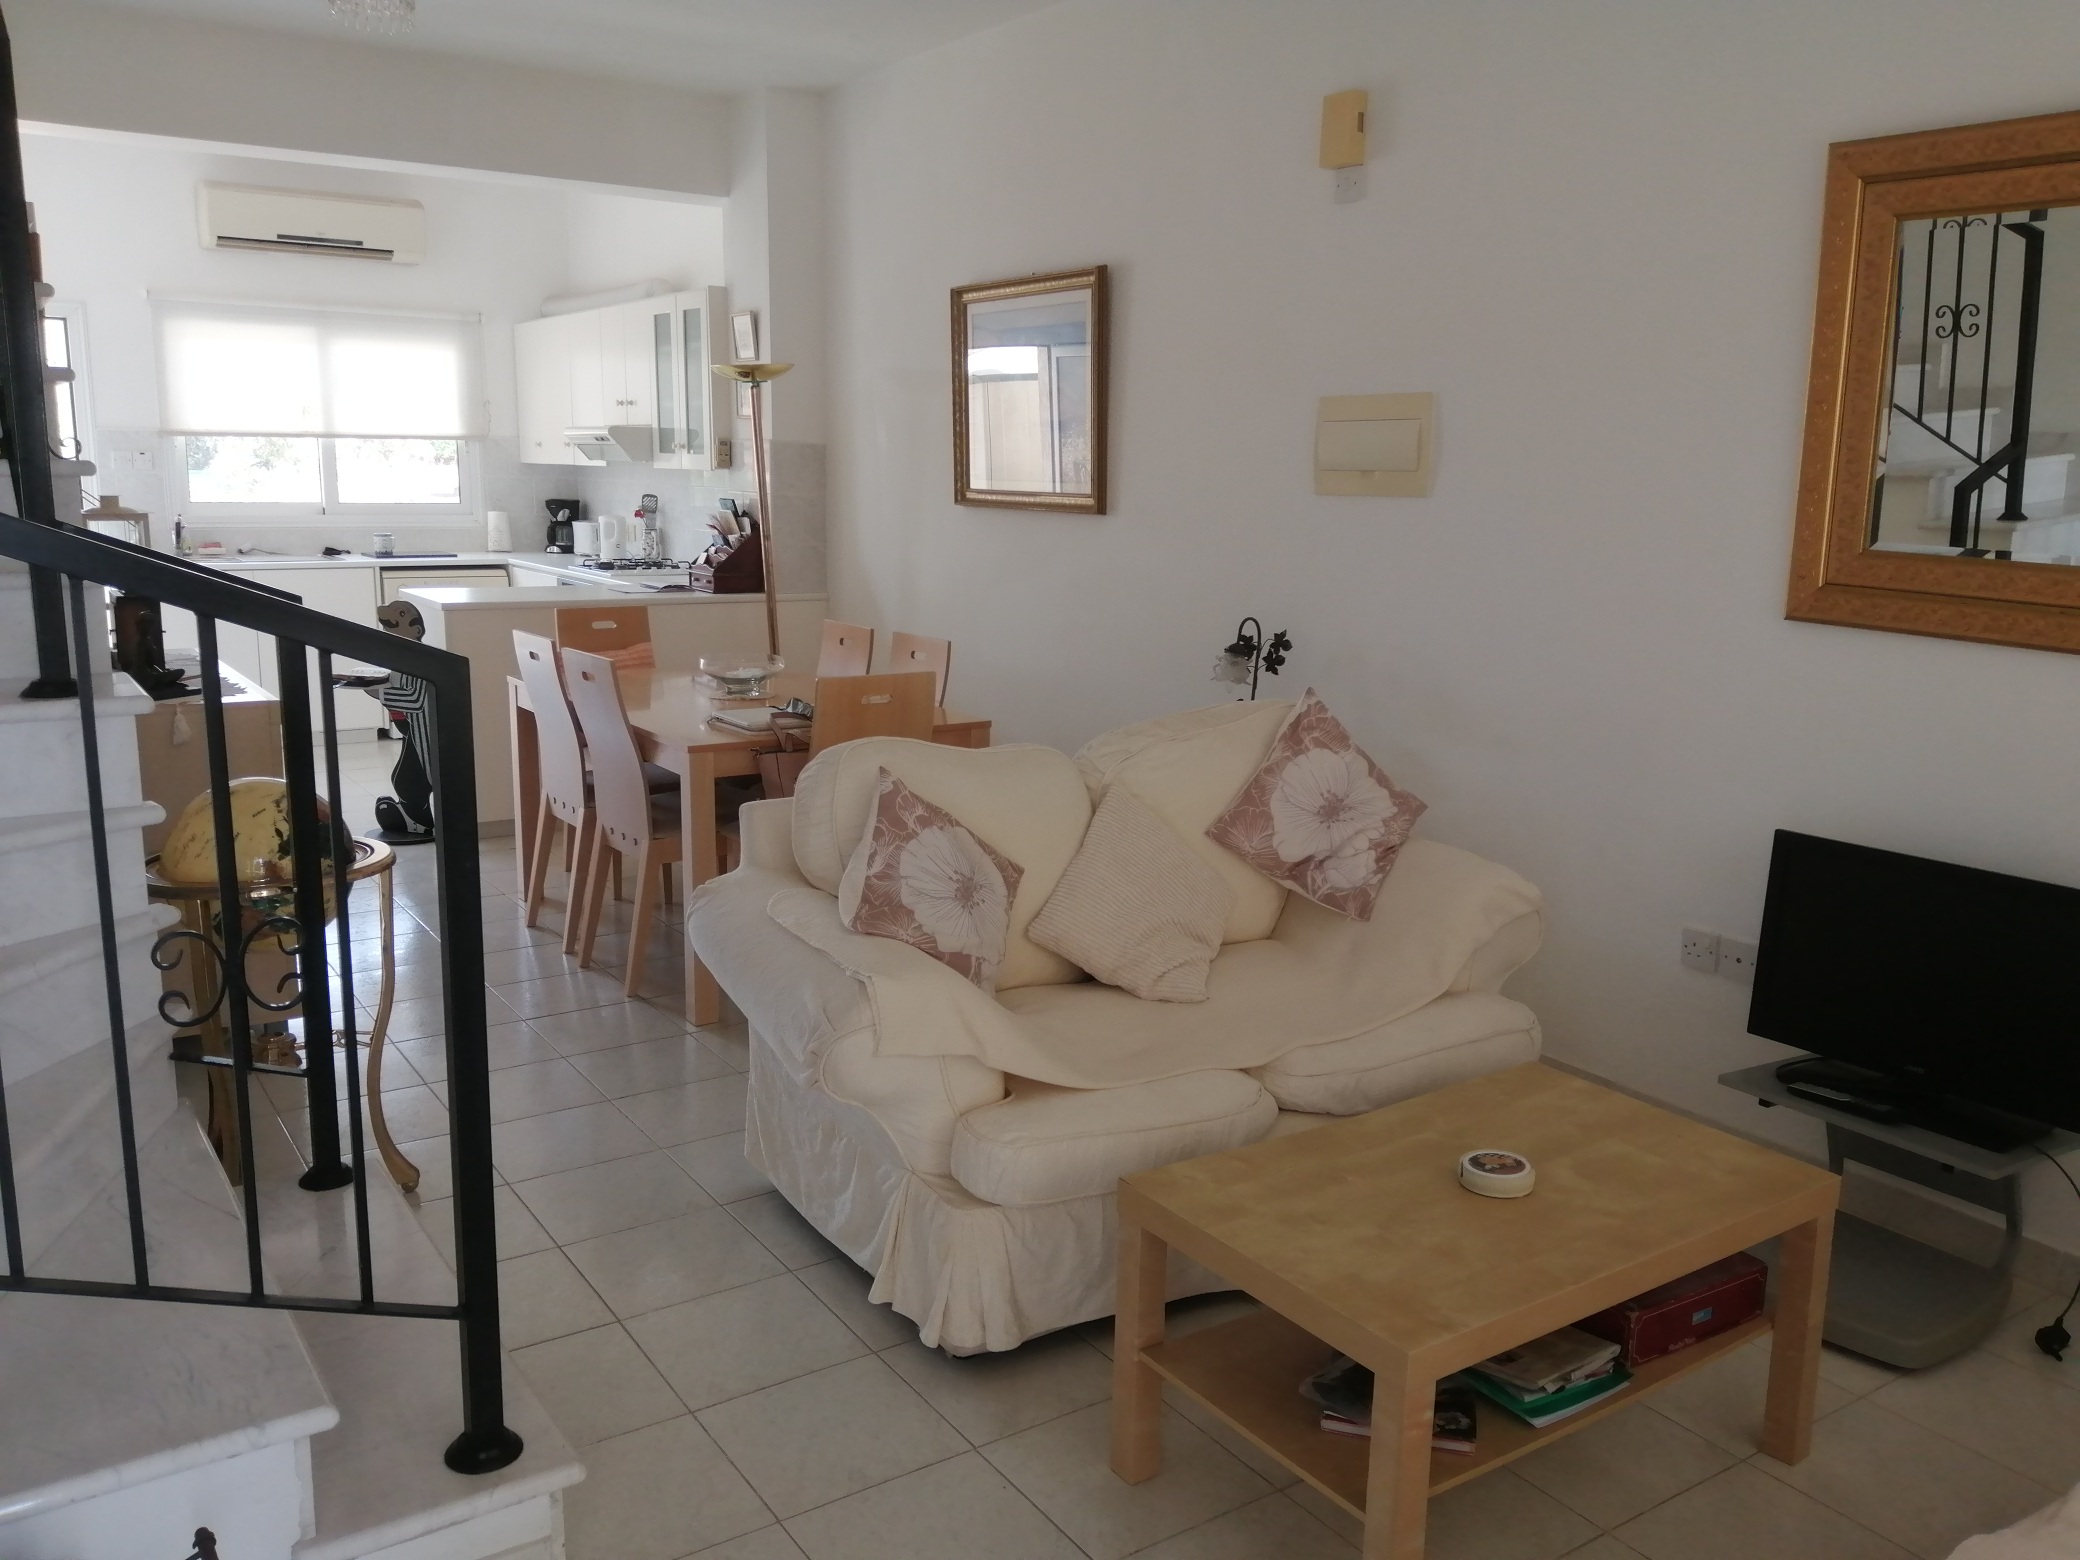 3 bedroom town- house in Pyla